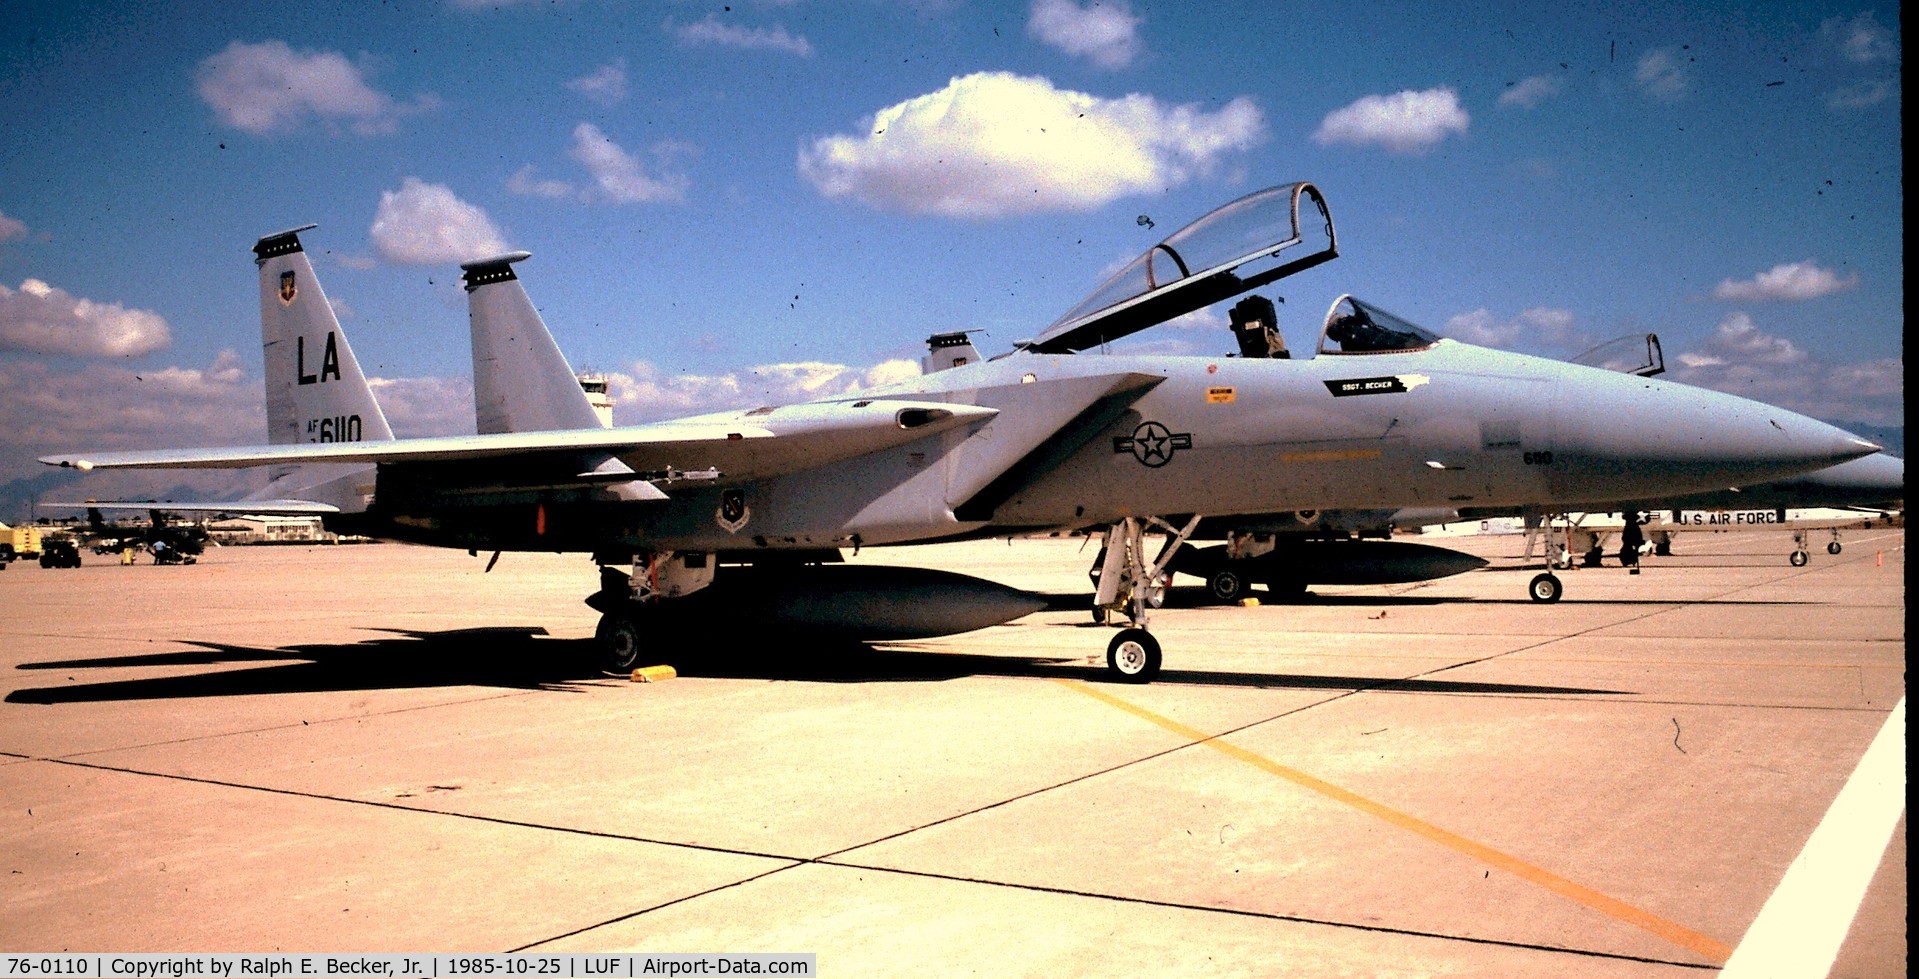 76-0110, 1976 McDonnell Douglas F-15A Eagle C/N 0314/A262, F-15A, Tail #76-0110, of the 405th TTW, 555th TFTS, Luke AFB, AZ. This Aircraft served as the 405th TTW Flagship from the mid to late 1980's, when I served as her DCC.